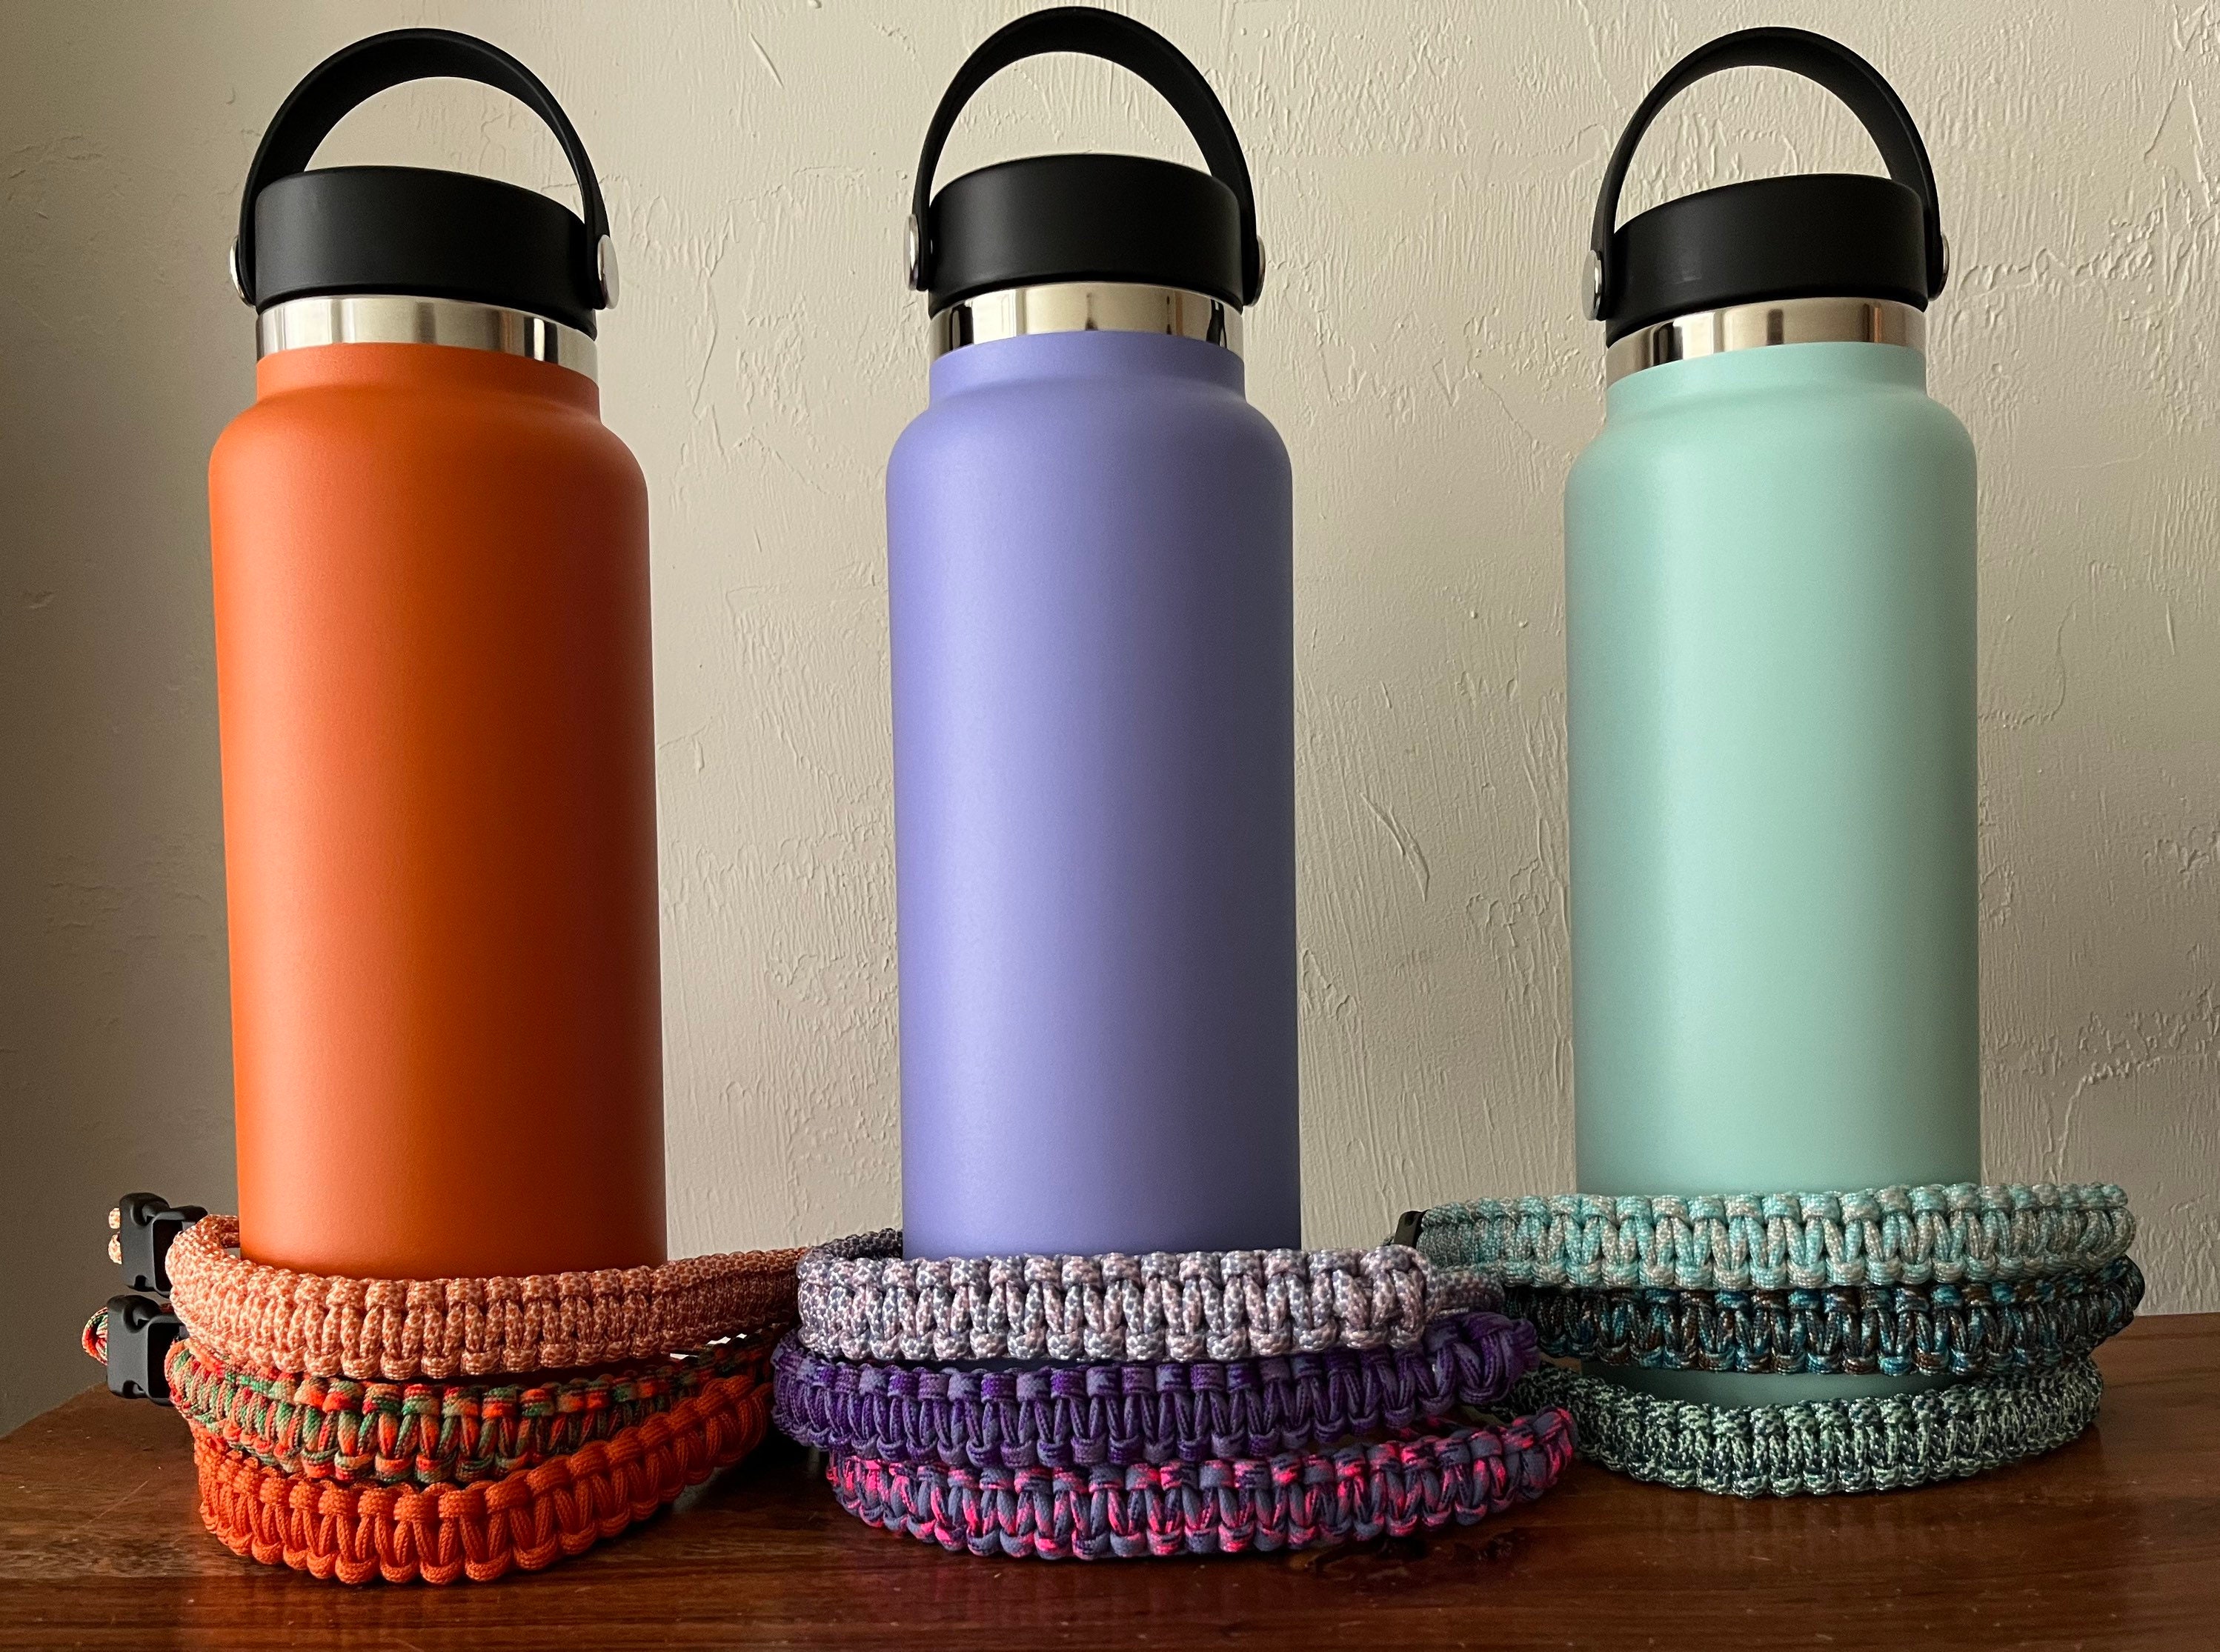 Linkidea Water Bottle Holder Strap Compatible with Hydro Flask, CamelBak,  Iron Flask, and Most Base Diameter 2.75 - 2.95 Bottles, Vegan Leather